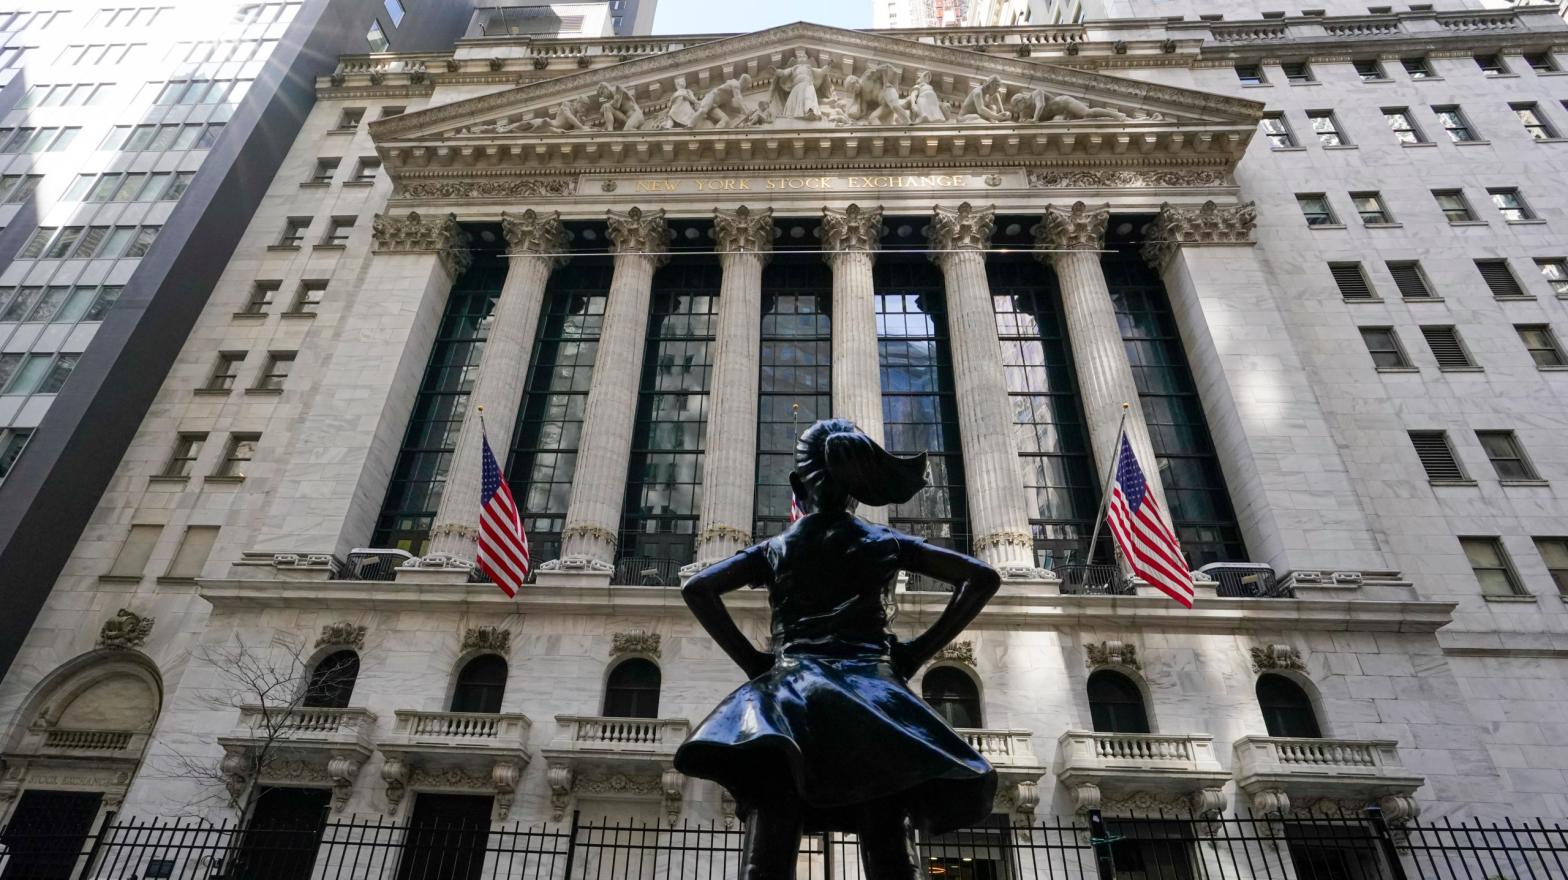 The Fearless Girl statue stands in front of the New York Stock Exchange in New York's Financial District. (Photo: Mary Altaffer, AP)